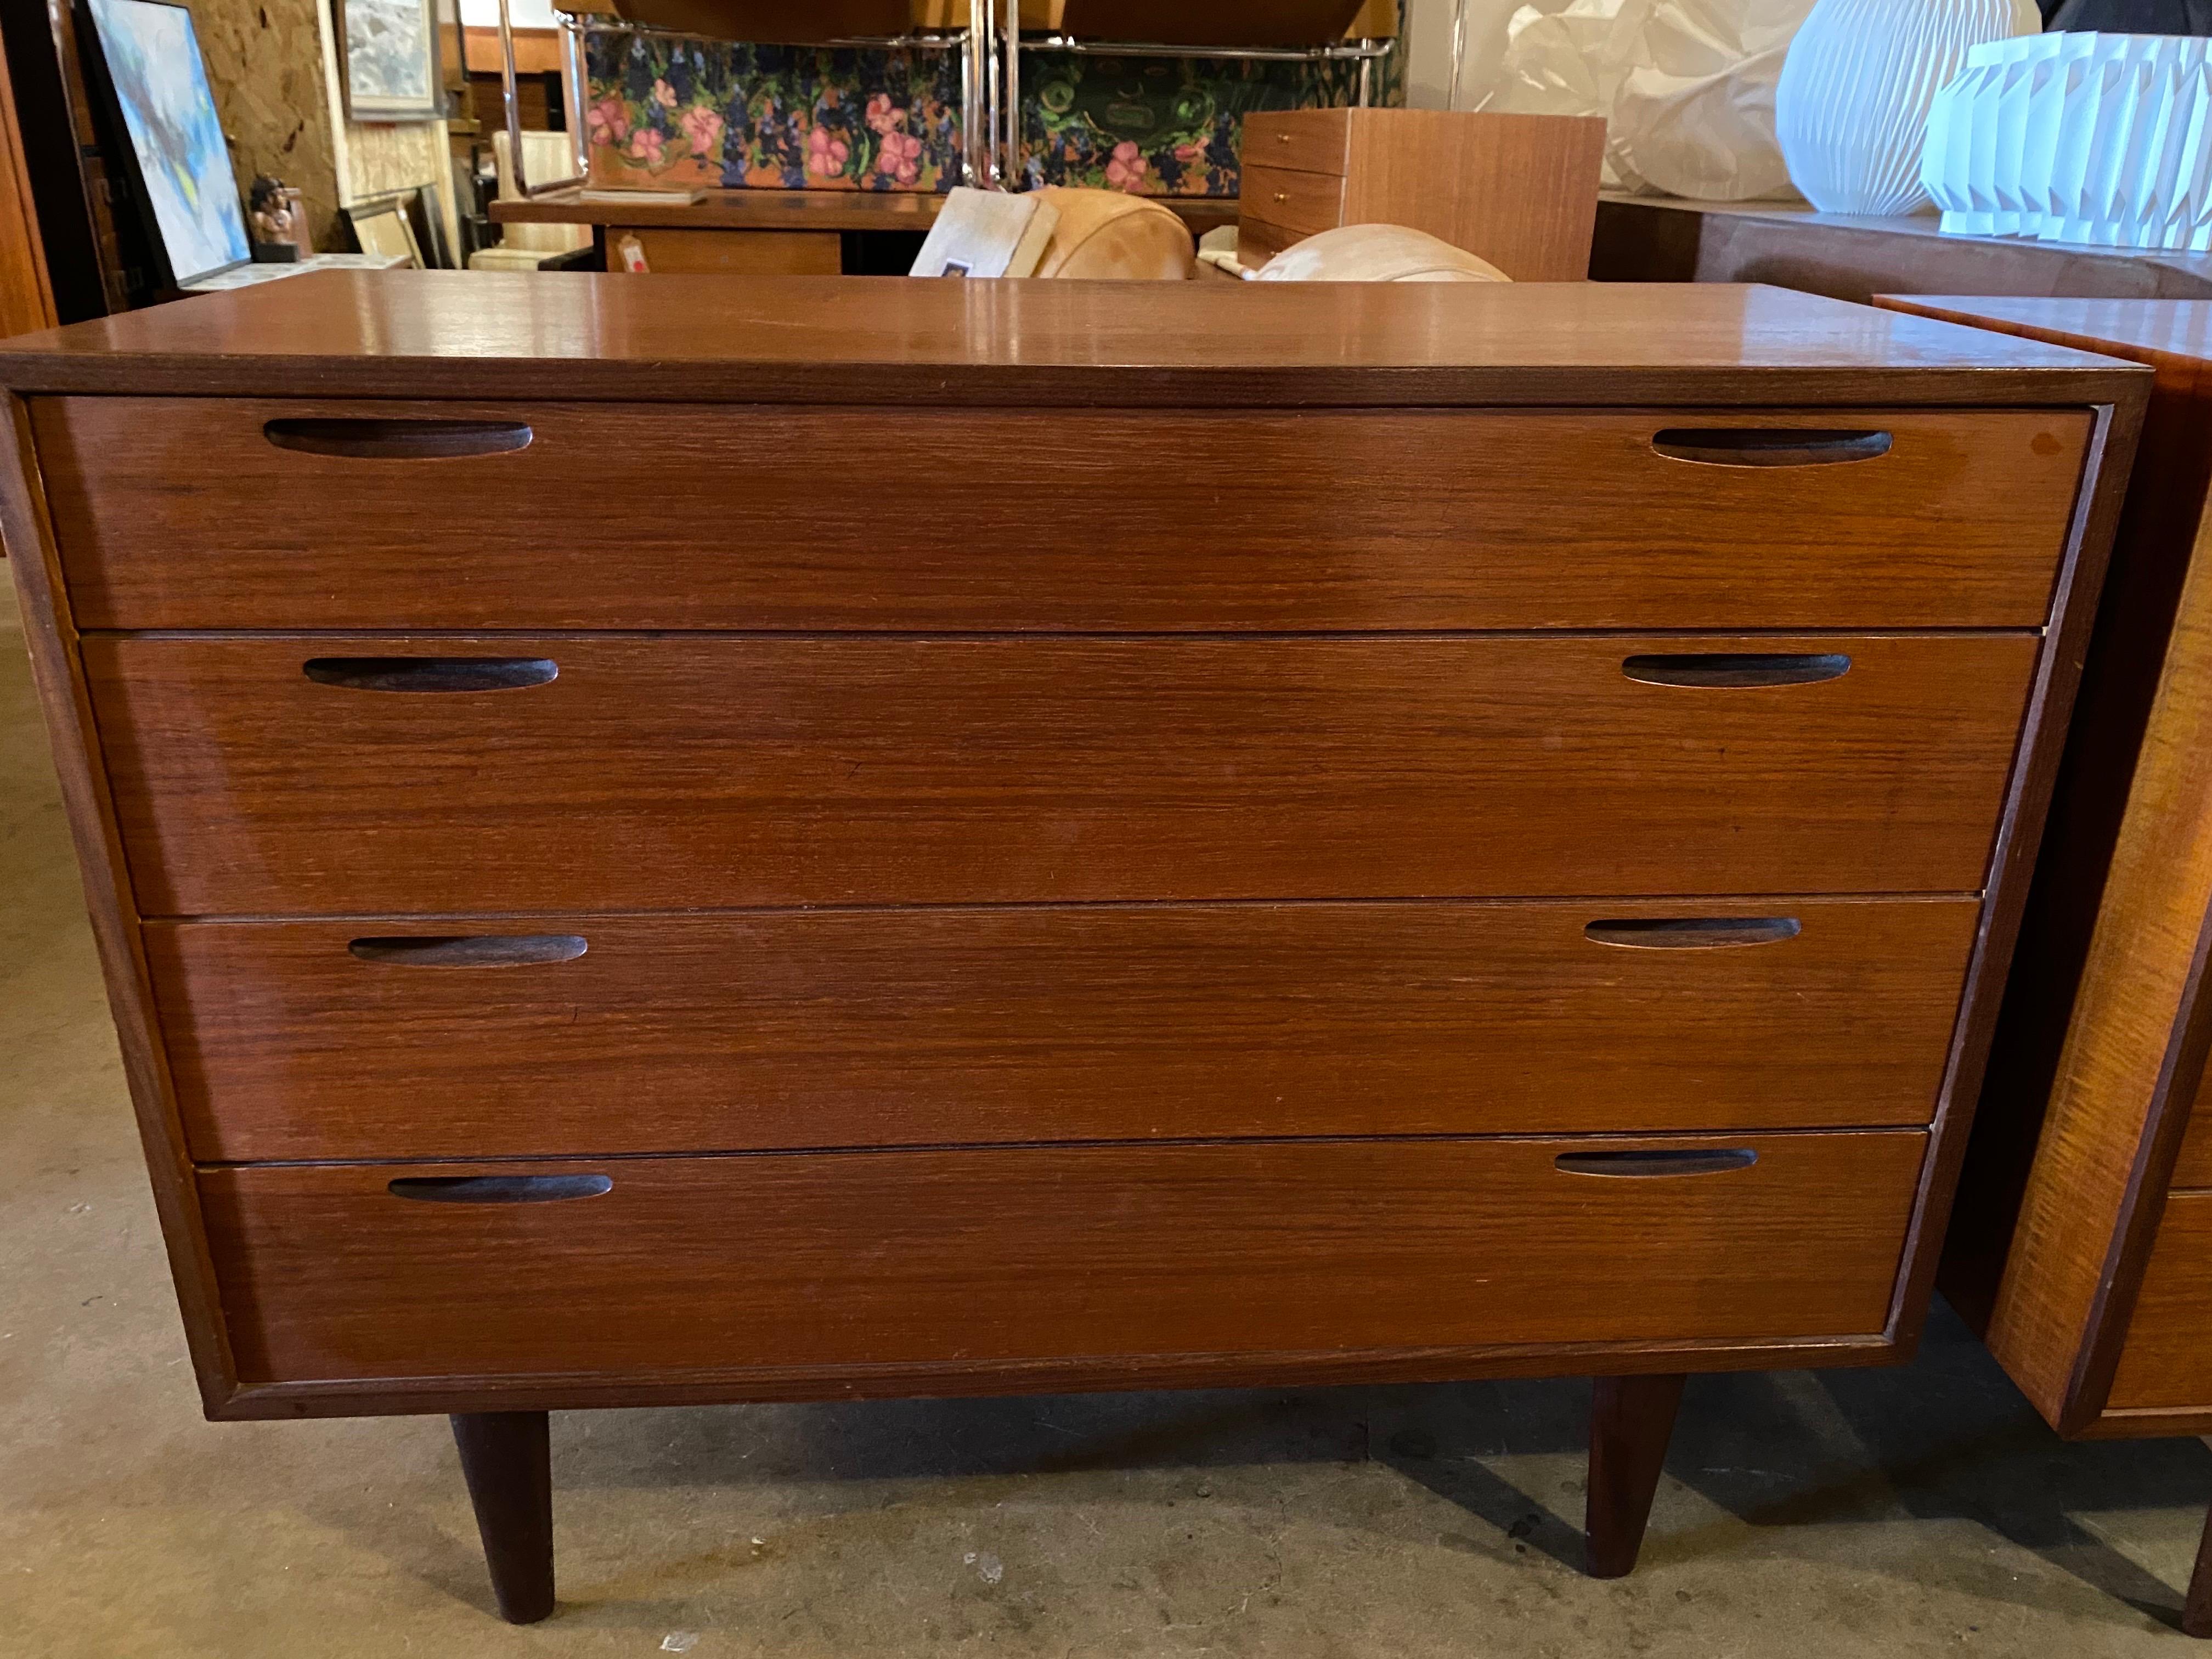 Pair of mid-century modern dressers with a finished back, sculpted pull handles, and four drawers made of teak designed by Kofod-Larsen for J Clausen. Circa 1950s, Denmark. This pair of mid-century modern dressers are in good overall condition and